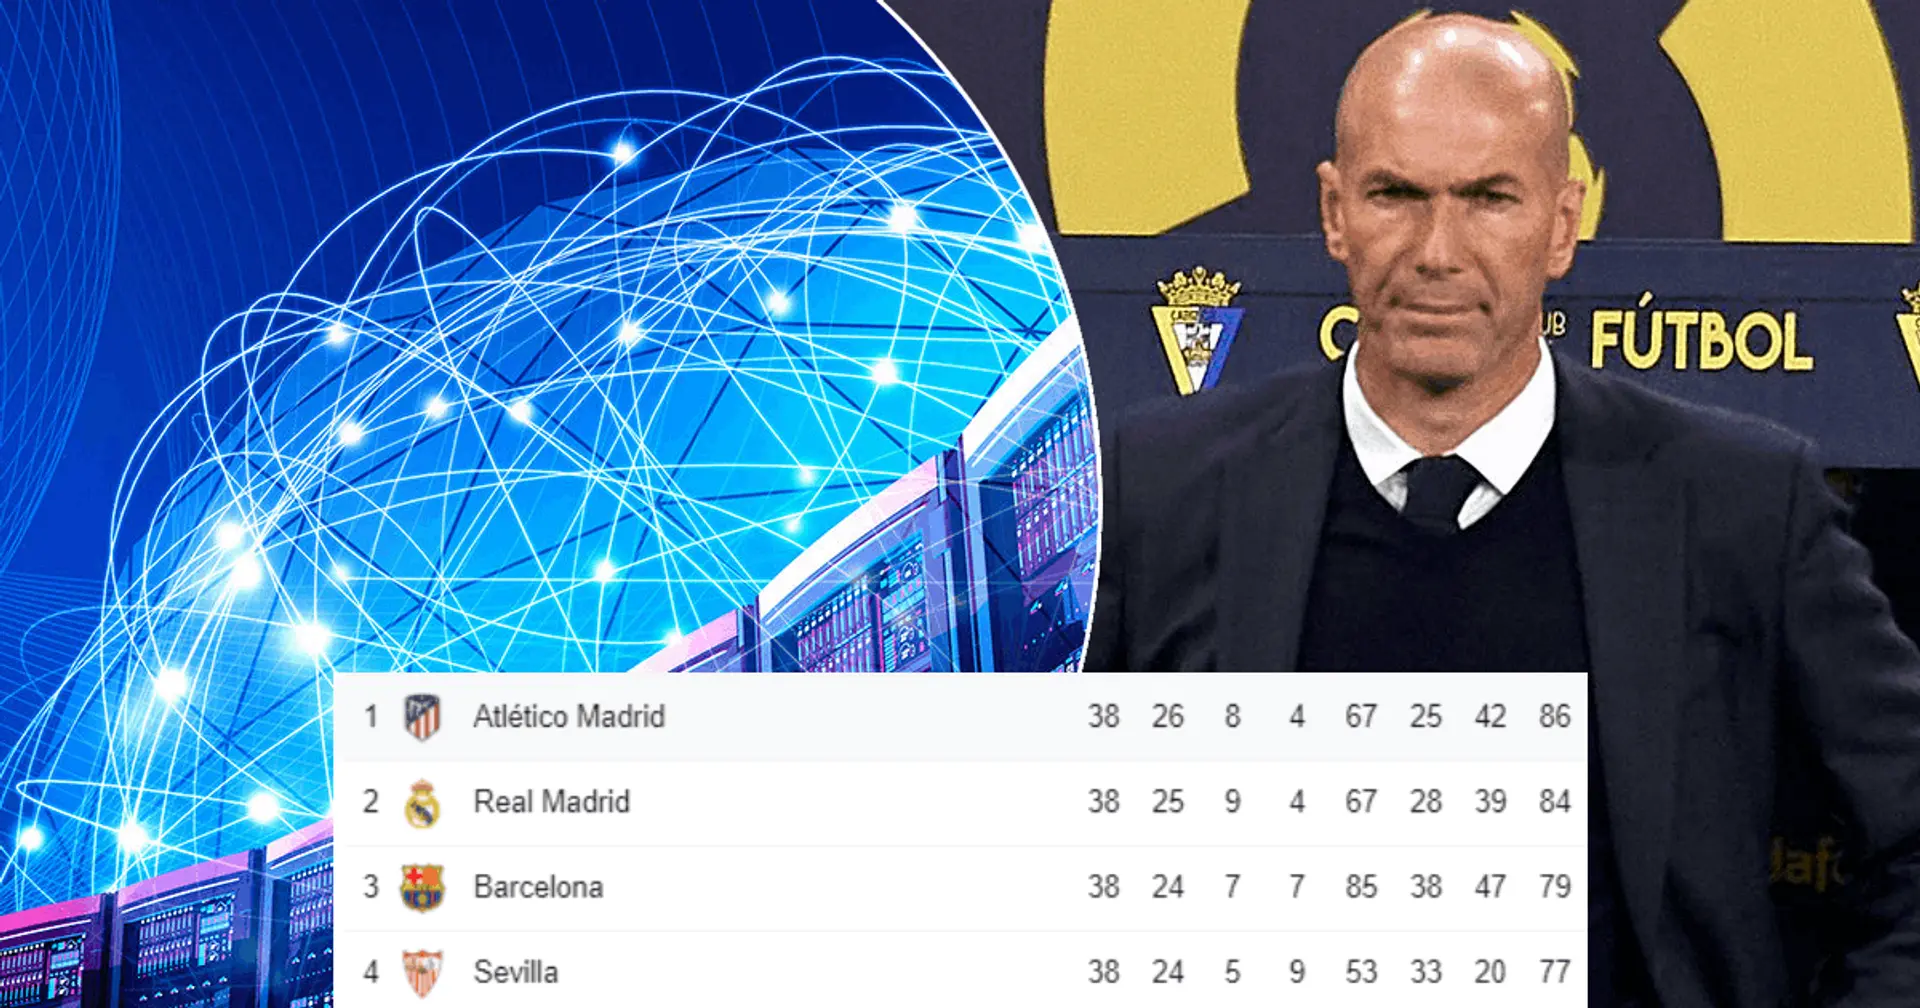 Super Computer correctly predicted Real Madrid's finish in La Liga at the start of season